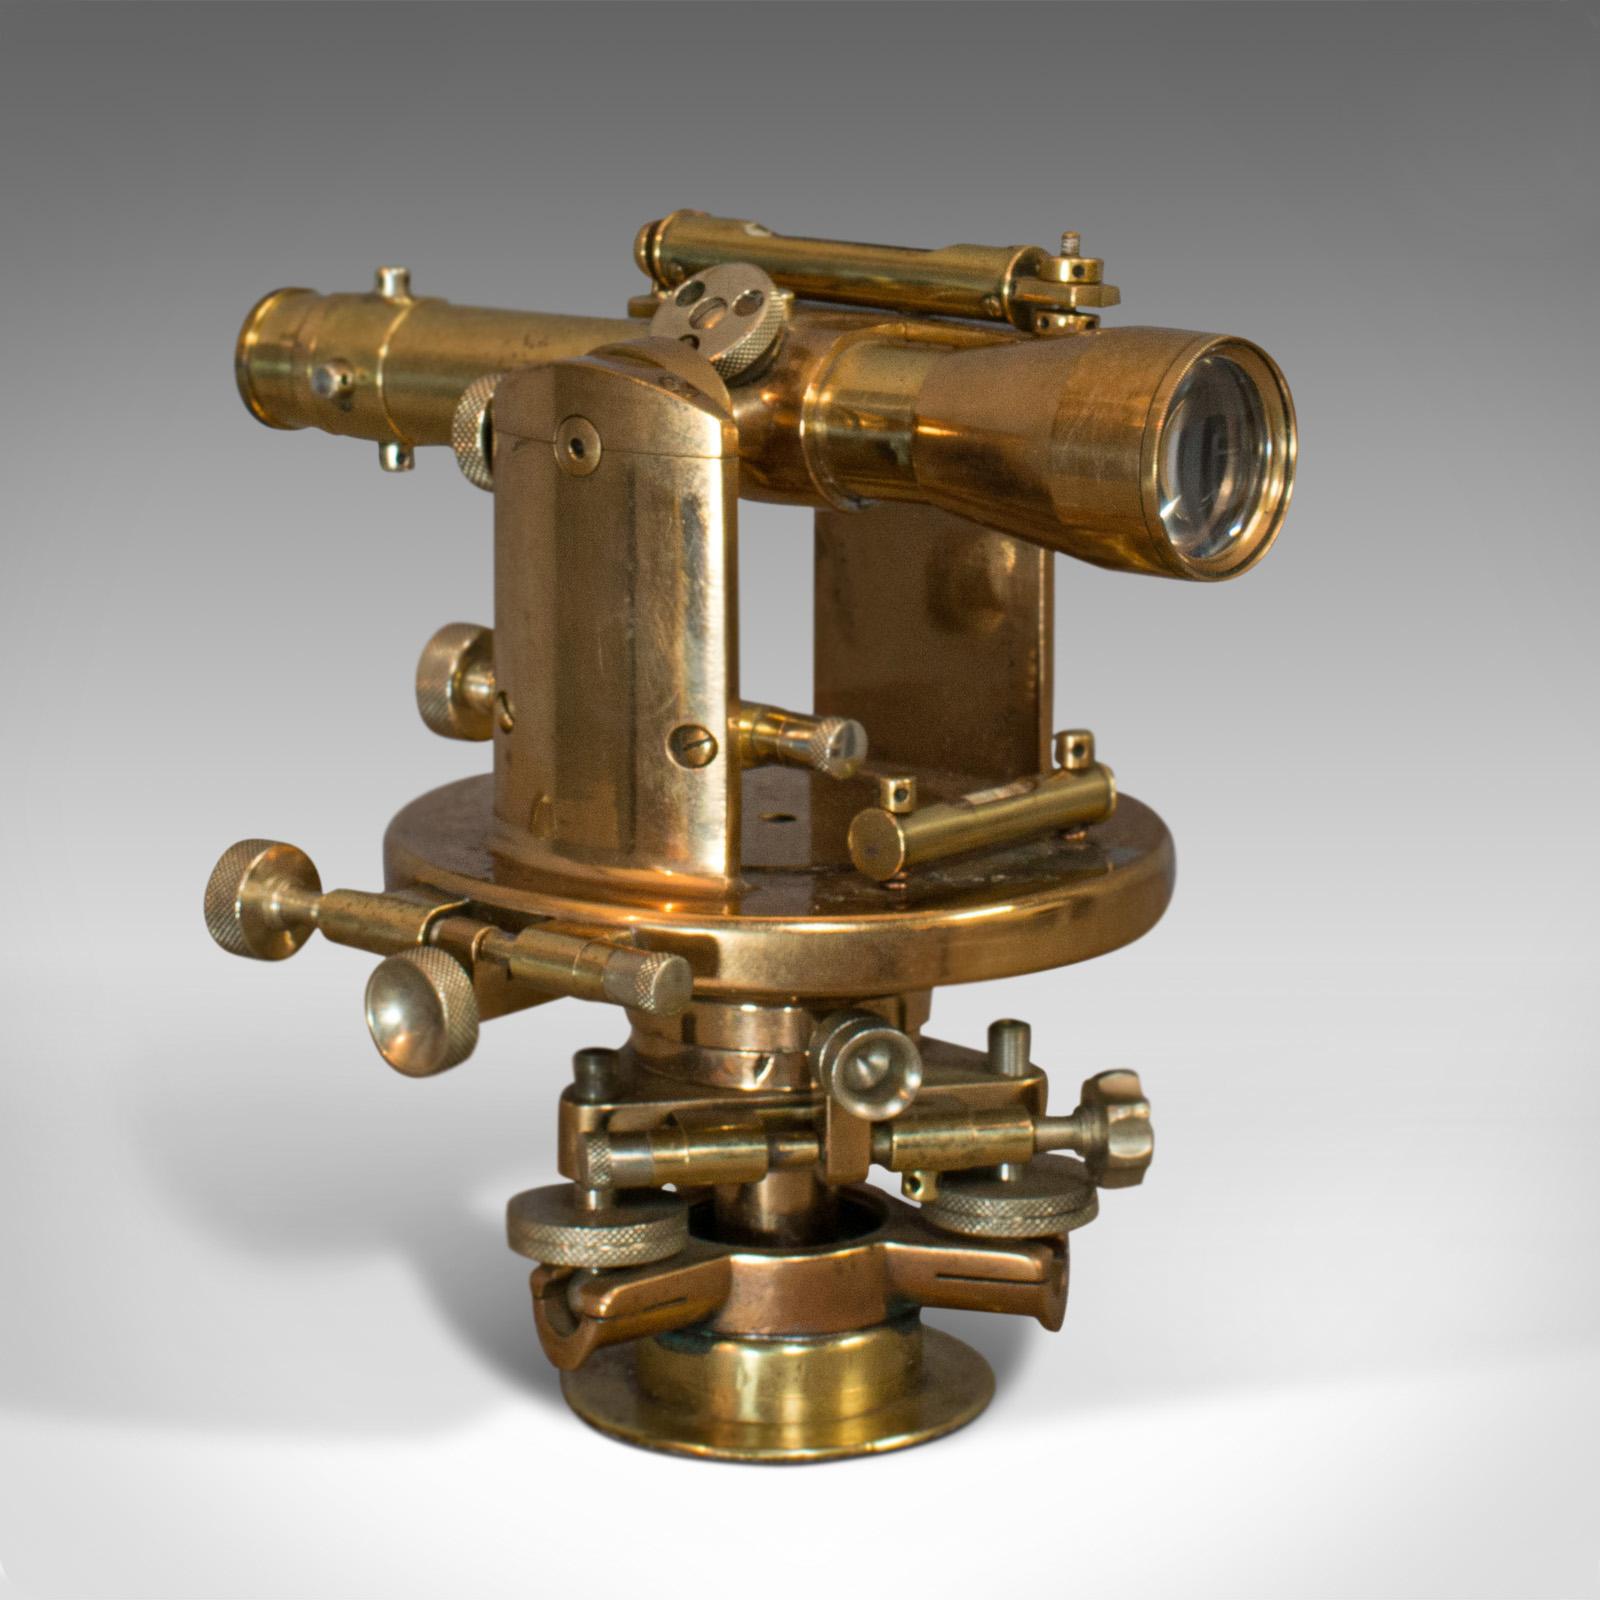 This is an antique theodolite. An English, bronze and brass scientific instrument or desk ornament, dating to the early 20th century, circa 1920.

Eye-catching period instrument
Displays a desirable aged patina
Polished bronze and brass finish with